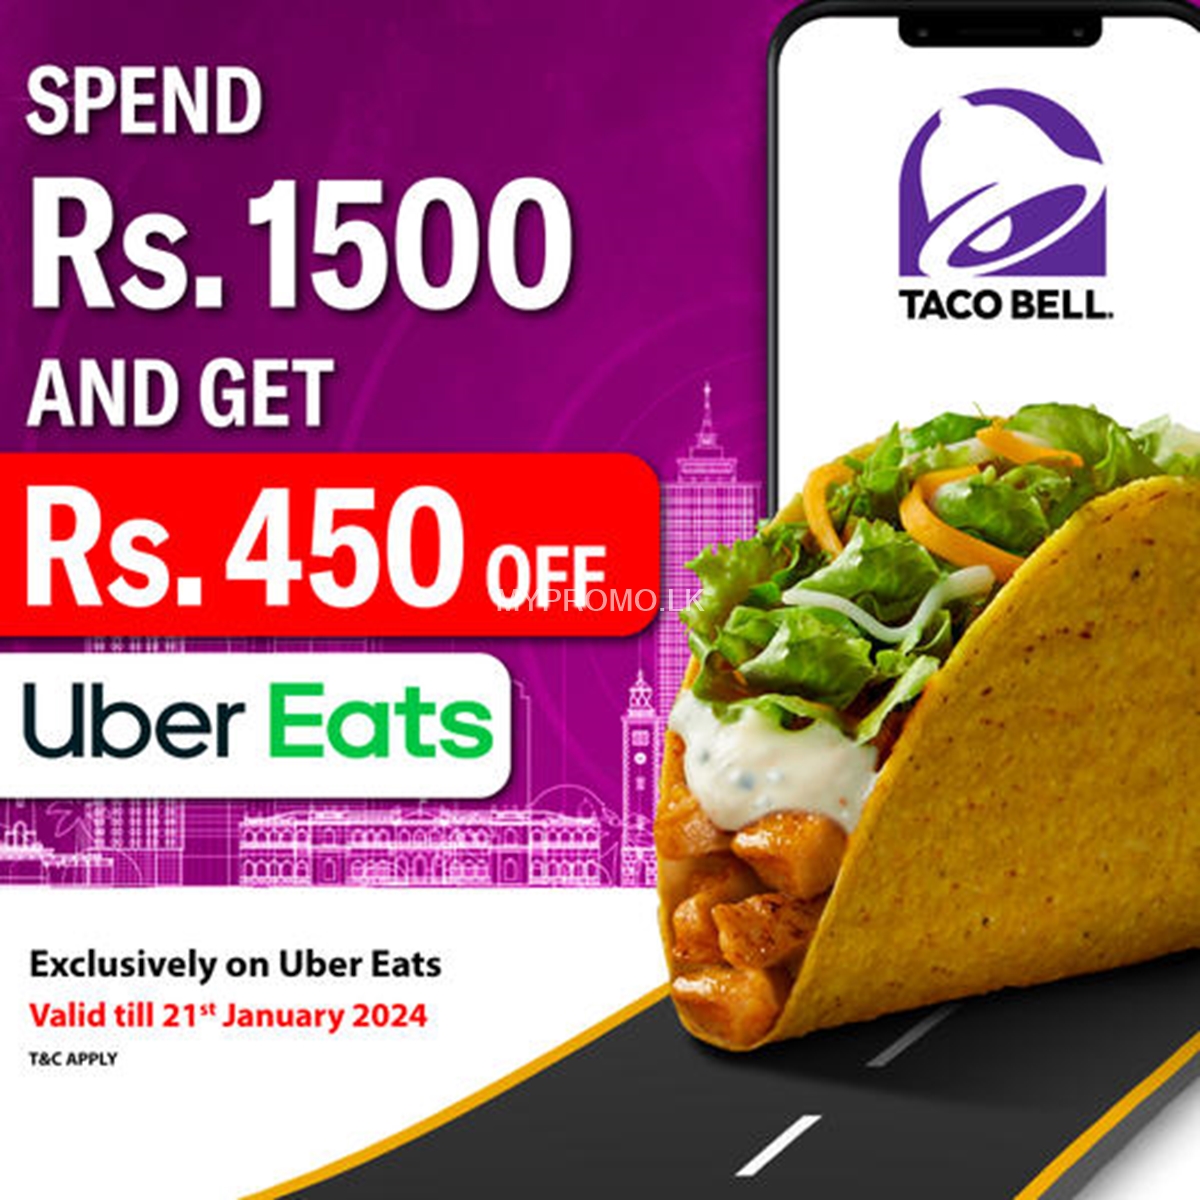 Spend Rs. 1500 and get Rs. 500 off on your total bill on Uber Eats for Uber One Members at TACO BELL Sri Lanka